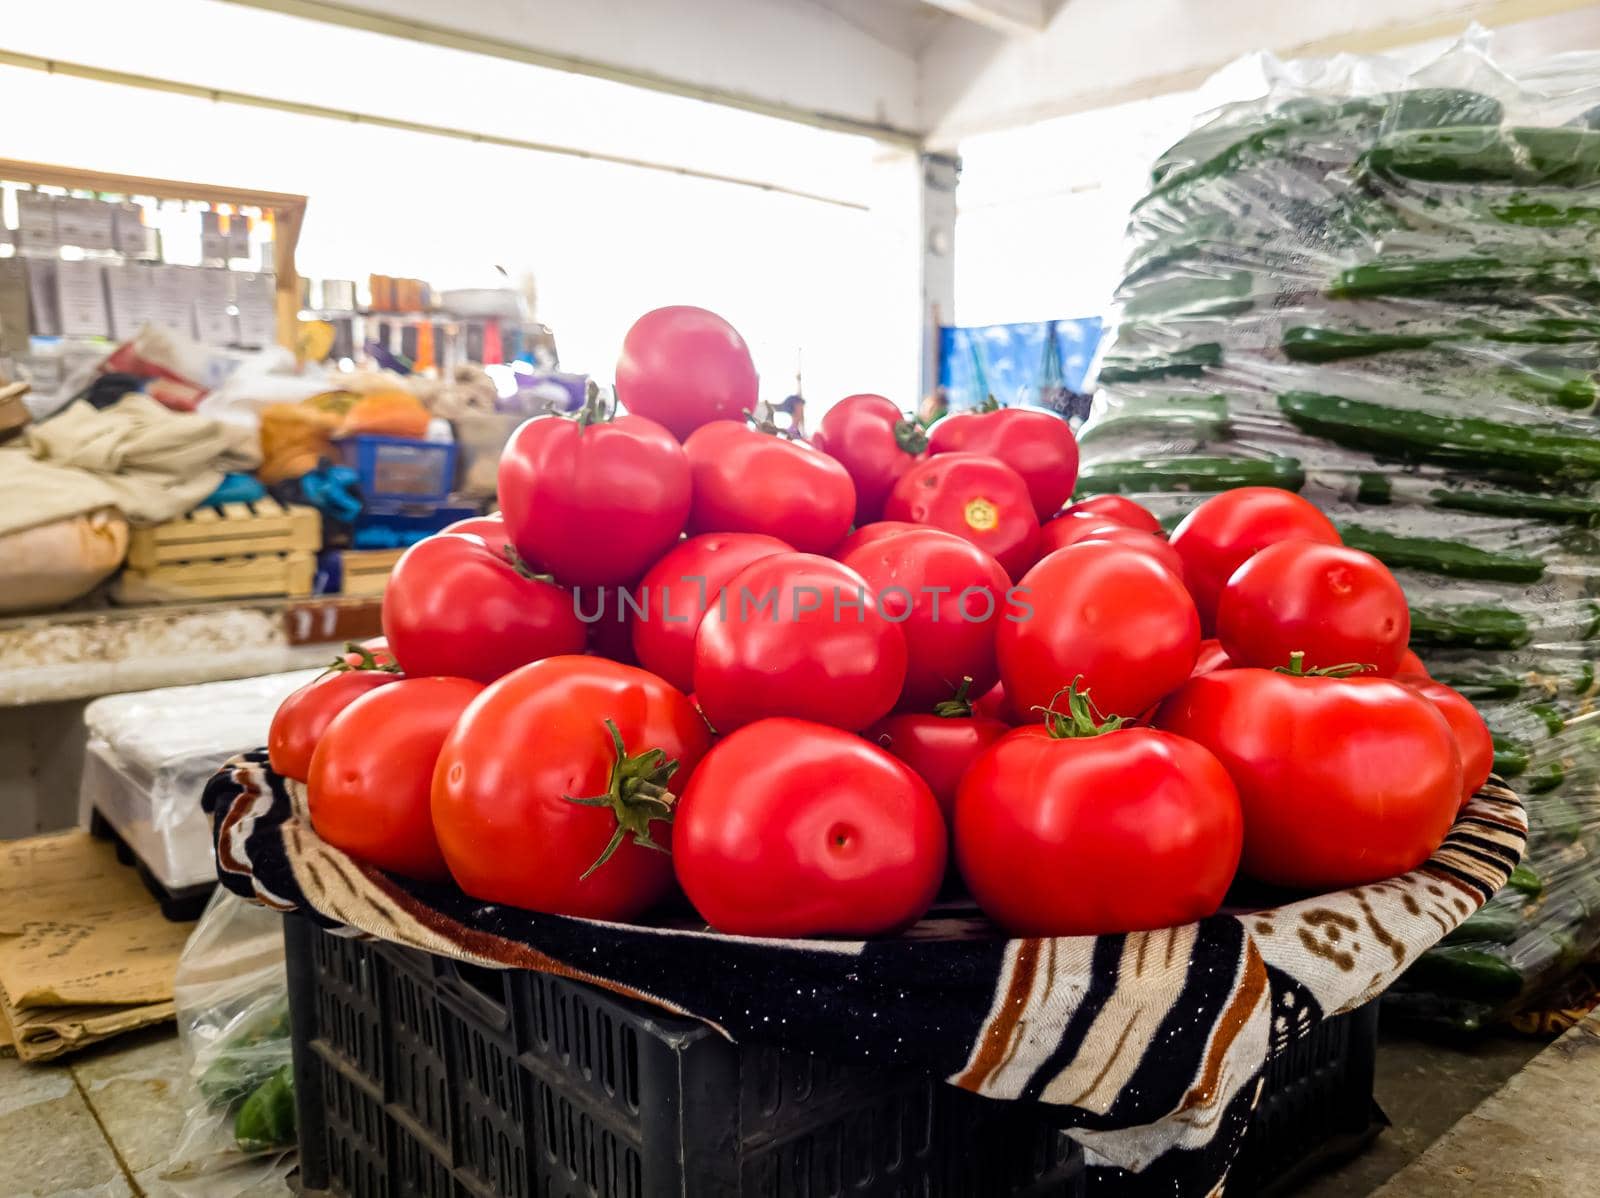 Street market with vegetables and fruits. Shopping for a bazaar. Counter with tomatoes